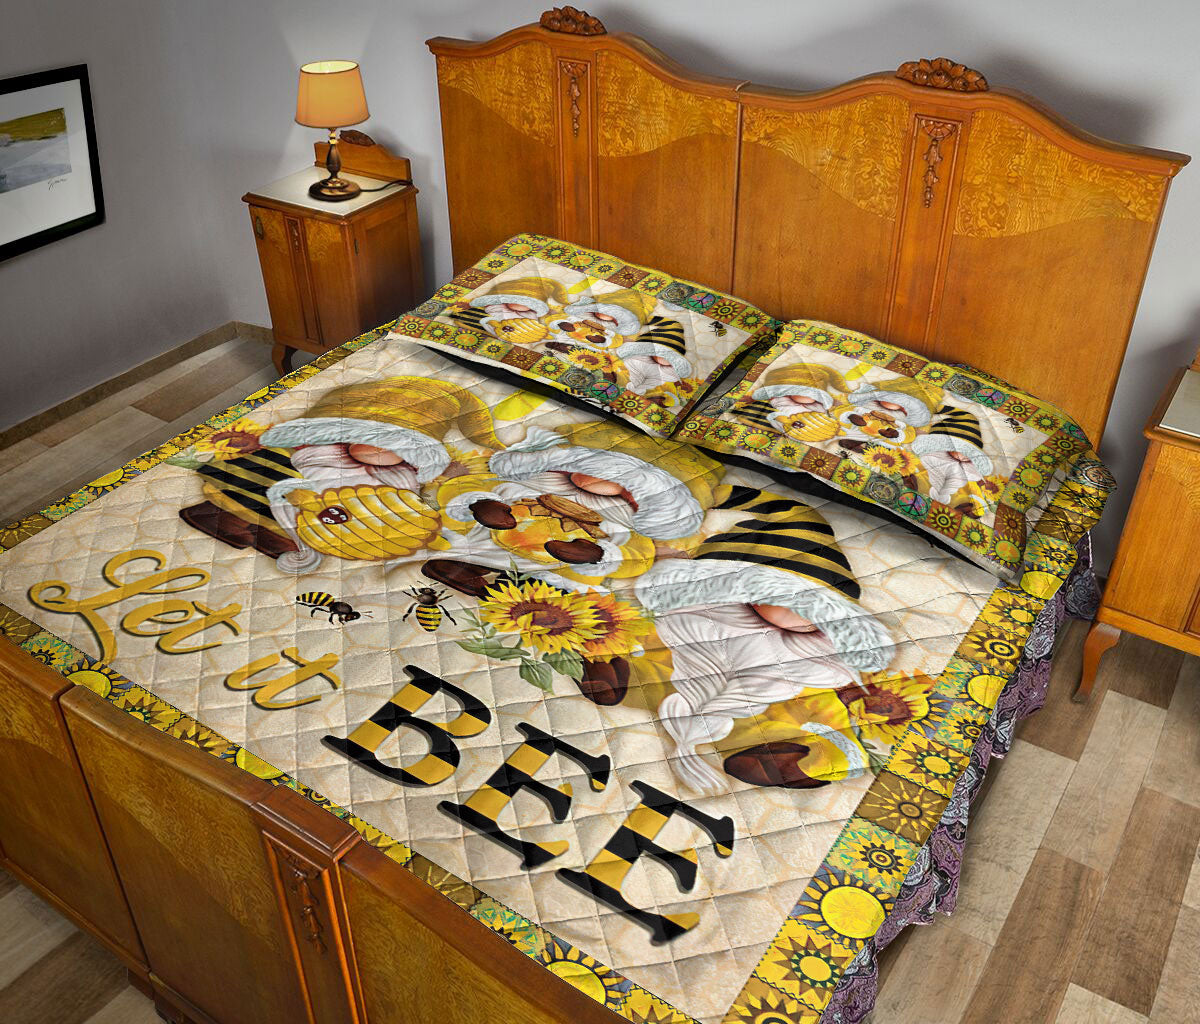 Ohaprints-Quilt-Bed-Set-Pillowcase-Bumble-Honey-Bee-Let-It-Bee-Gnome-Yellow-Sunflower-Honeycomb-Pattern-Blanket-Bedspread-Bedding-1813-Queen (80'' x 90'')